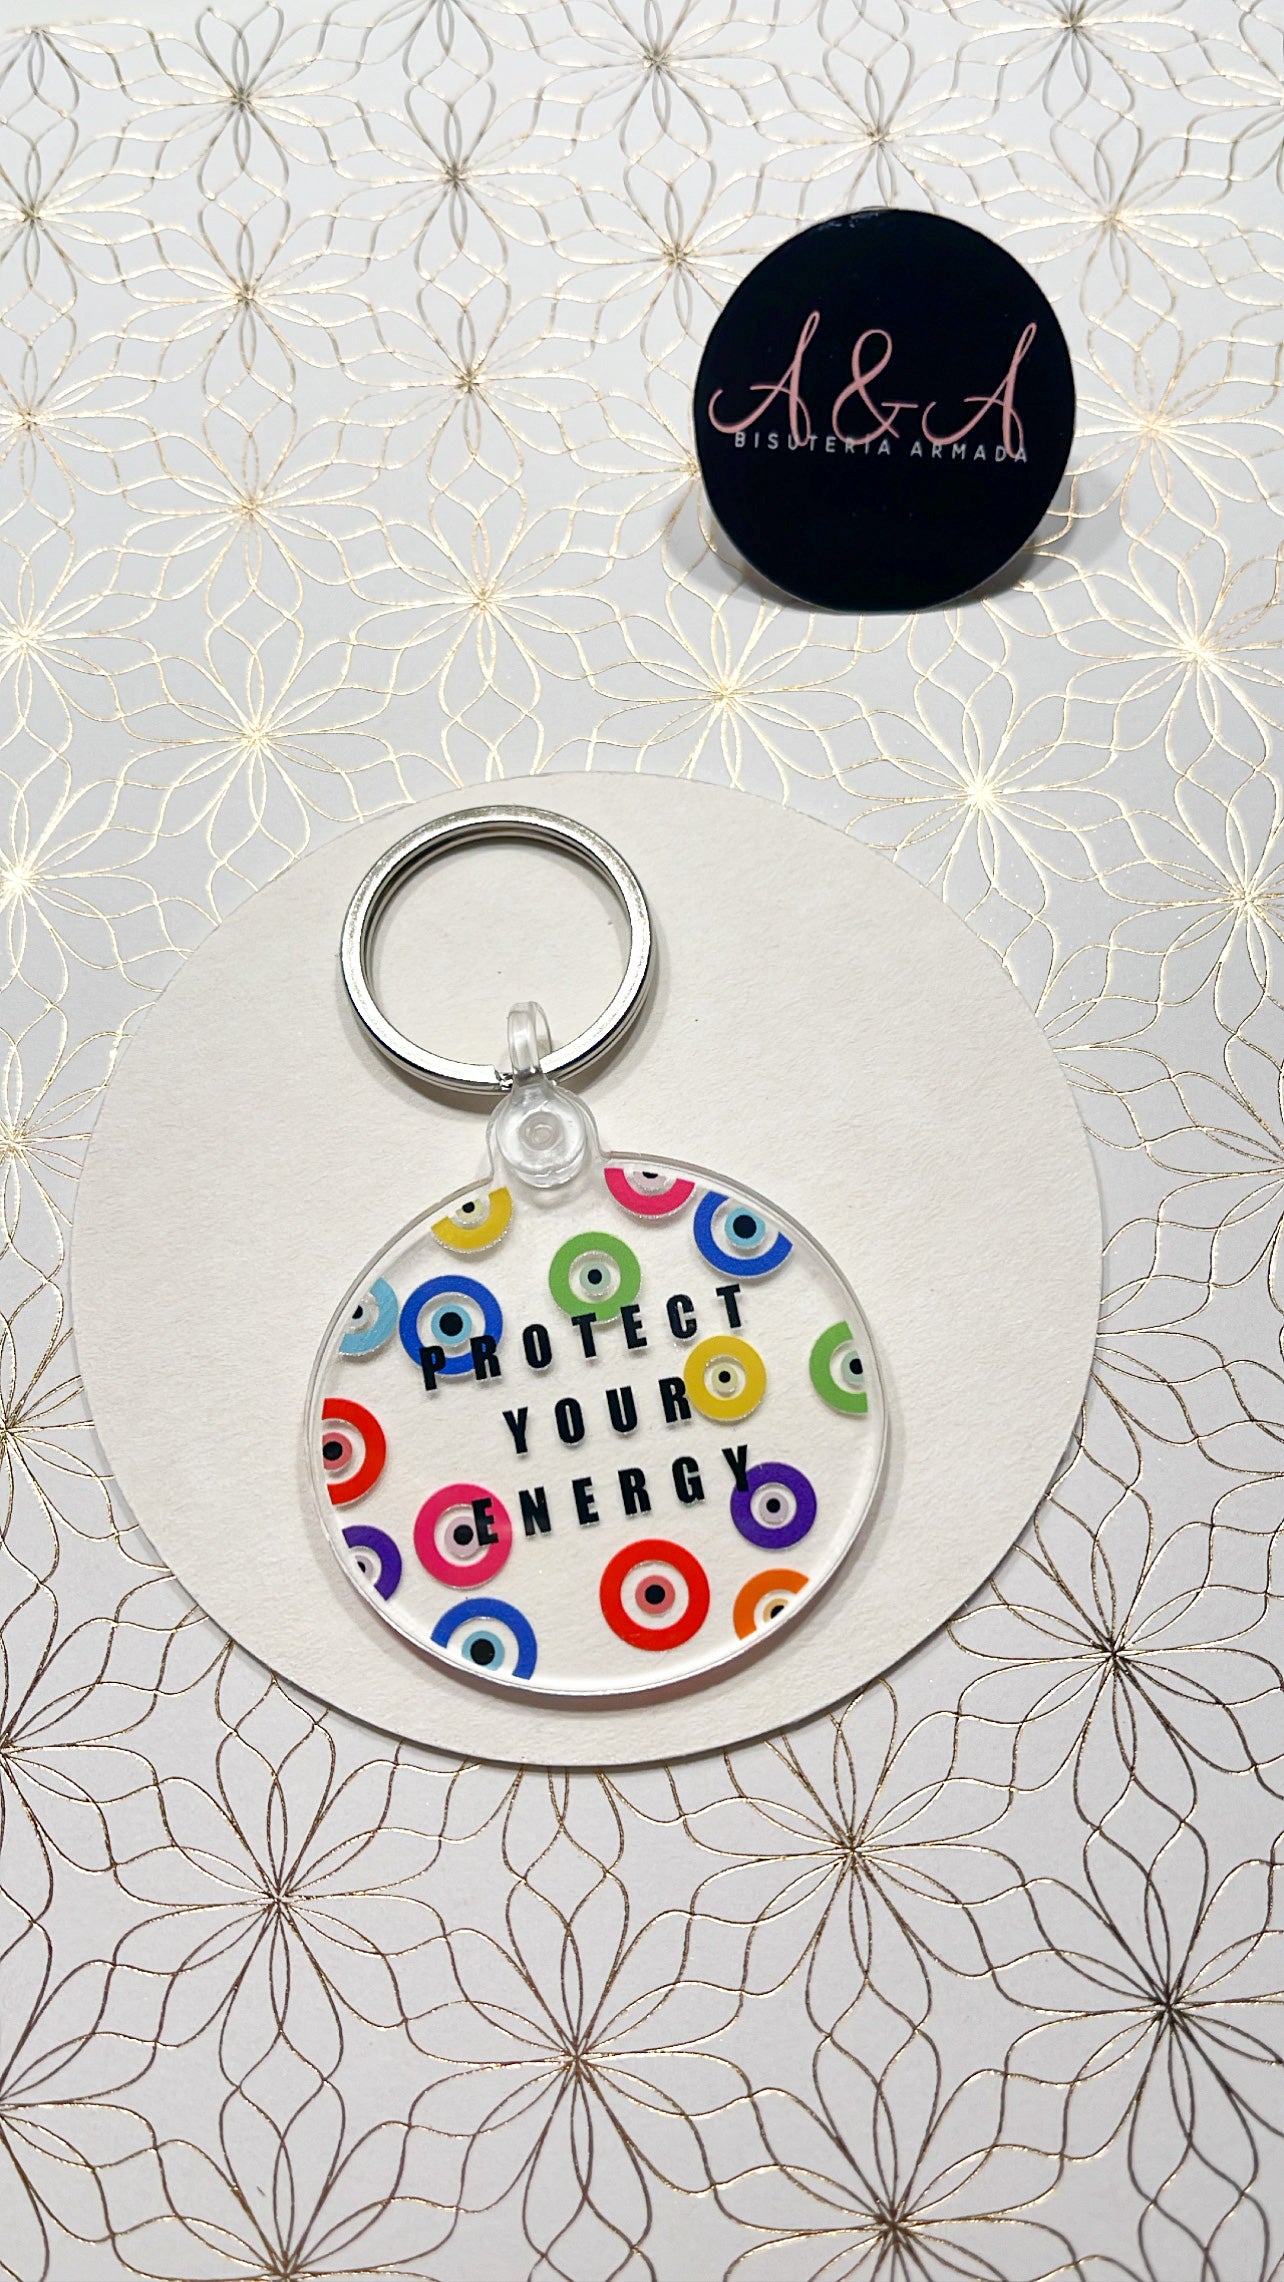 Protect Your Energy Keychain